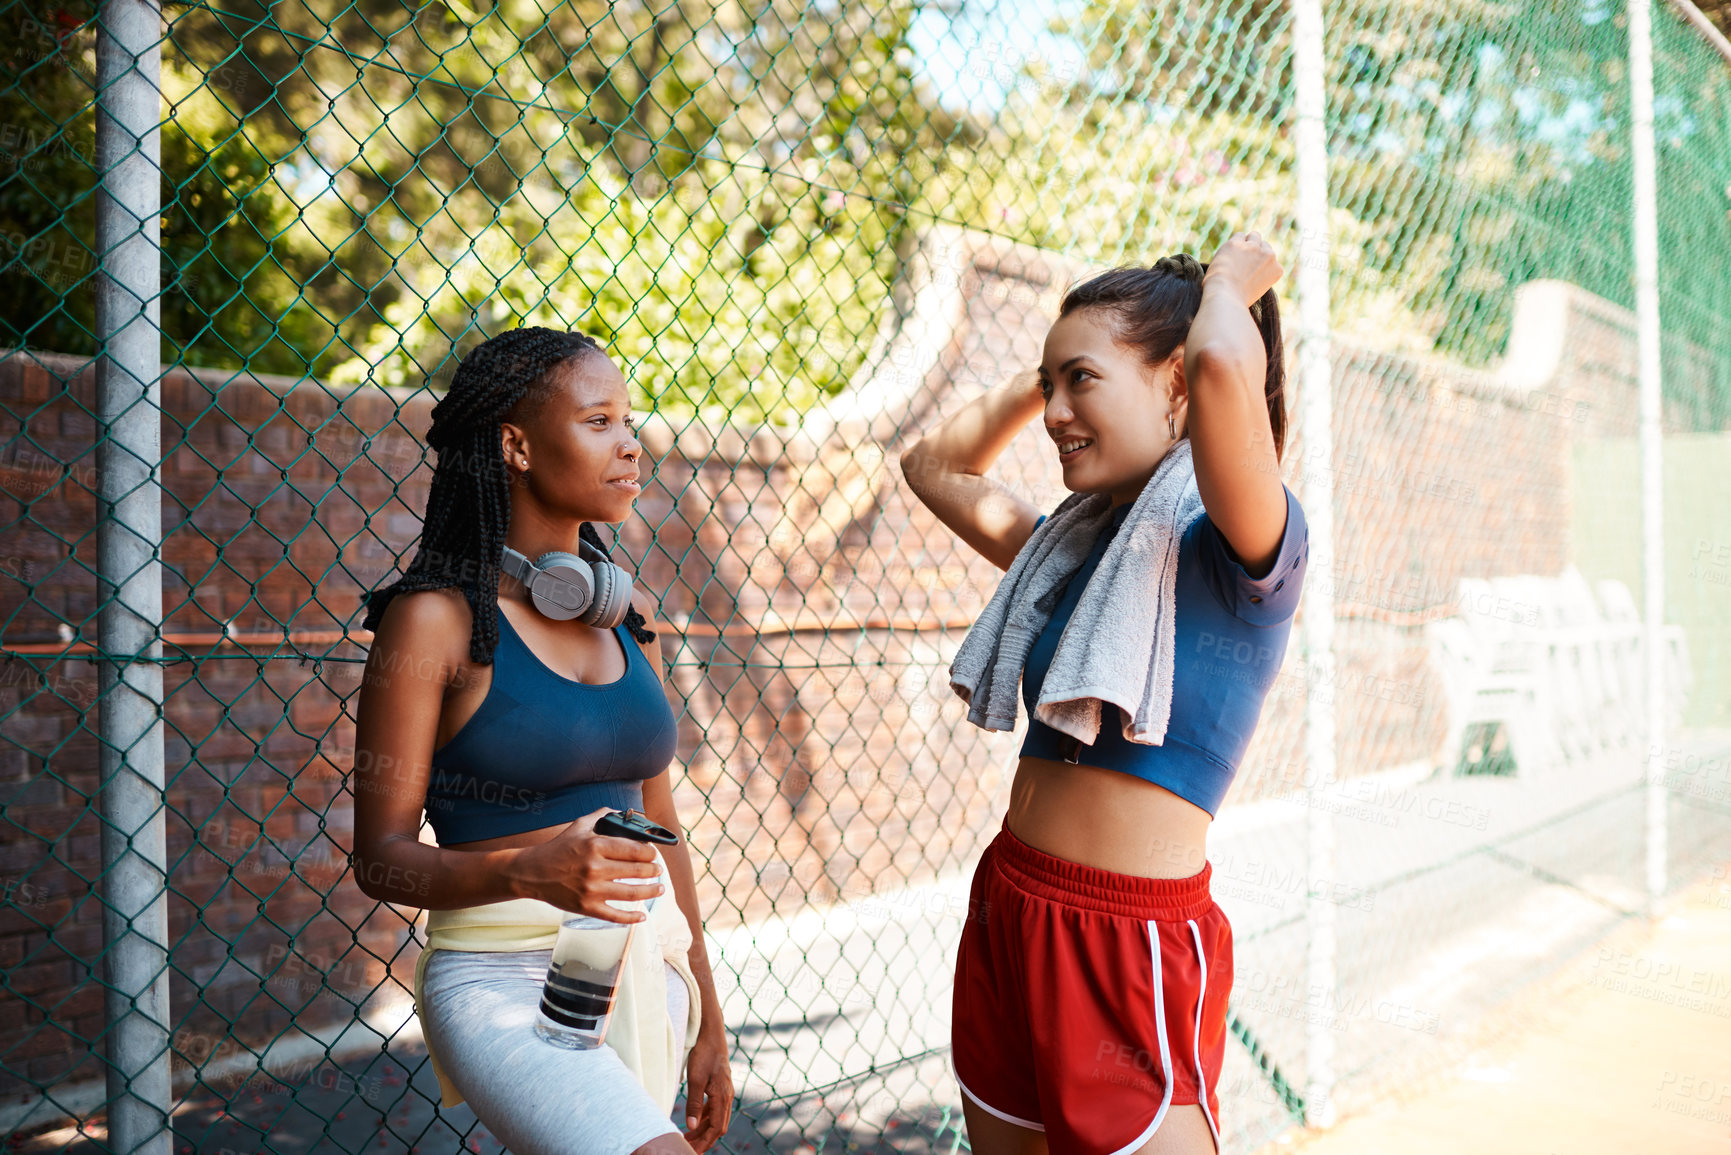 Buy stock photo Shot of two sporty young women chatting to each other against a fence outdoors